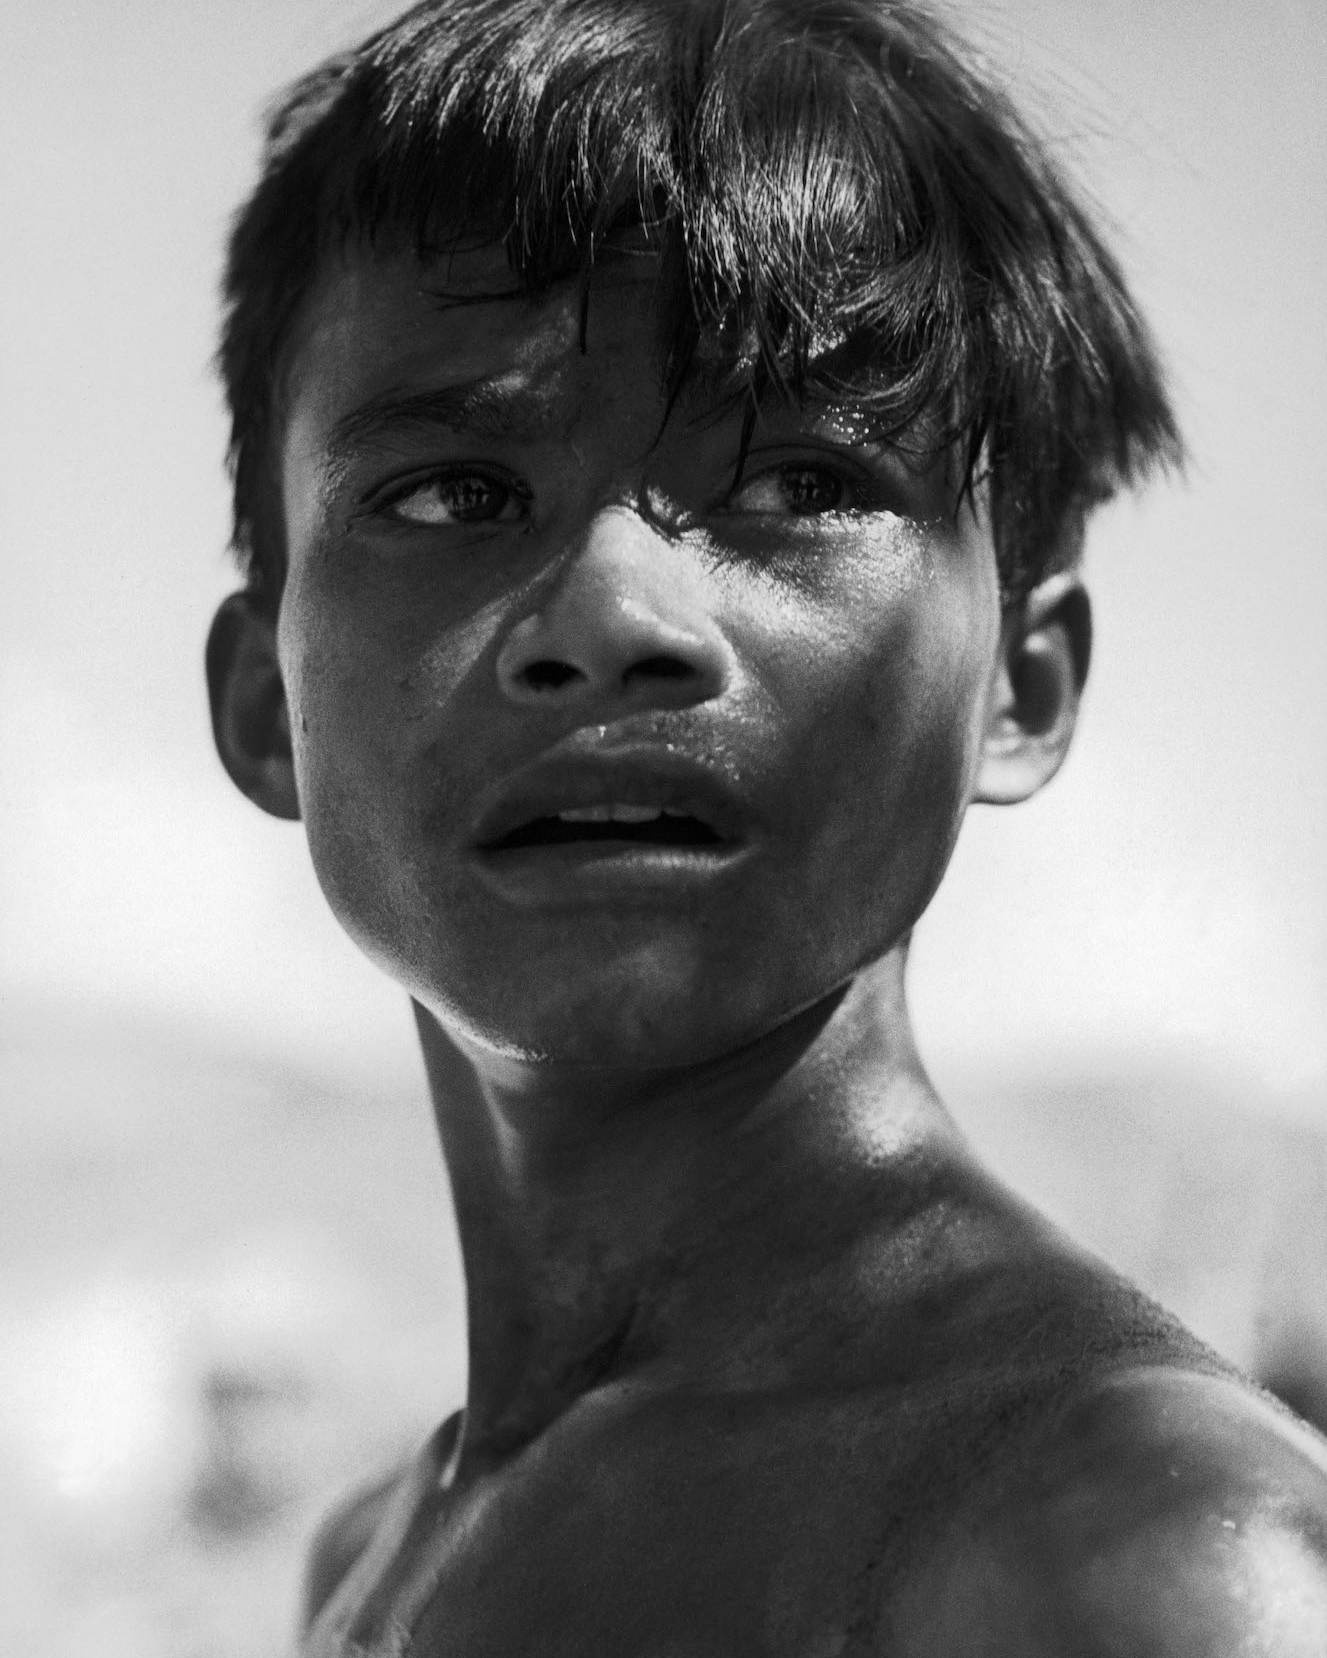 CAMBODIA. Angkor. Young khmer (ethnolinguistic group that constitutes most of the population of Cambodia). 1952.